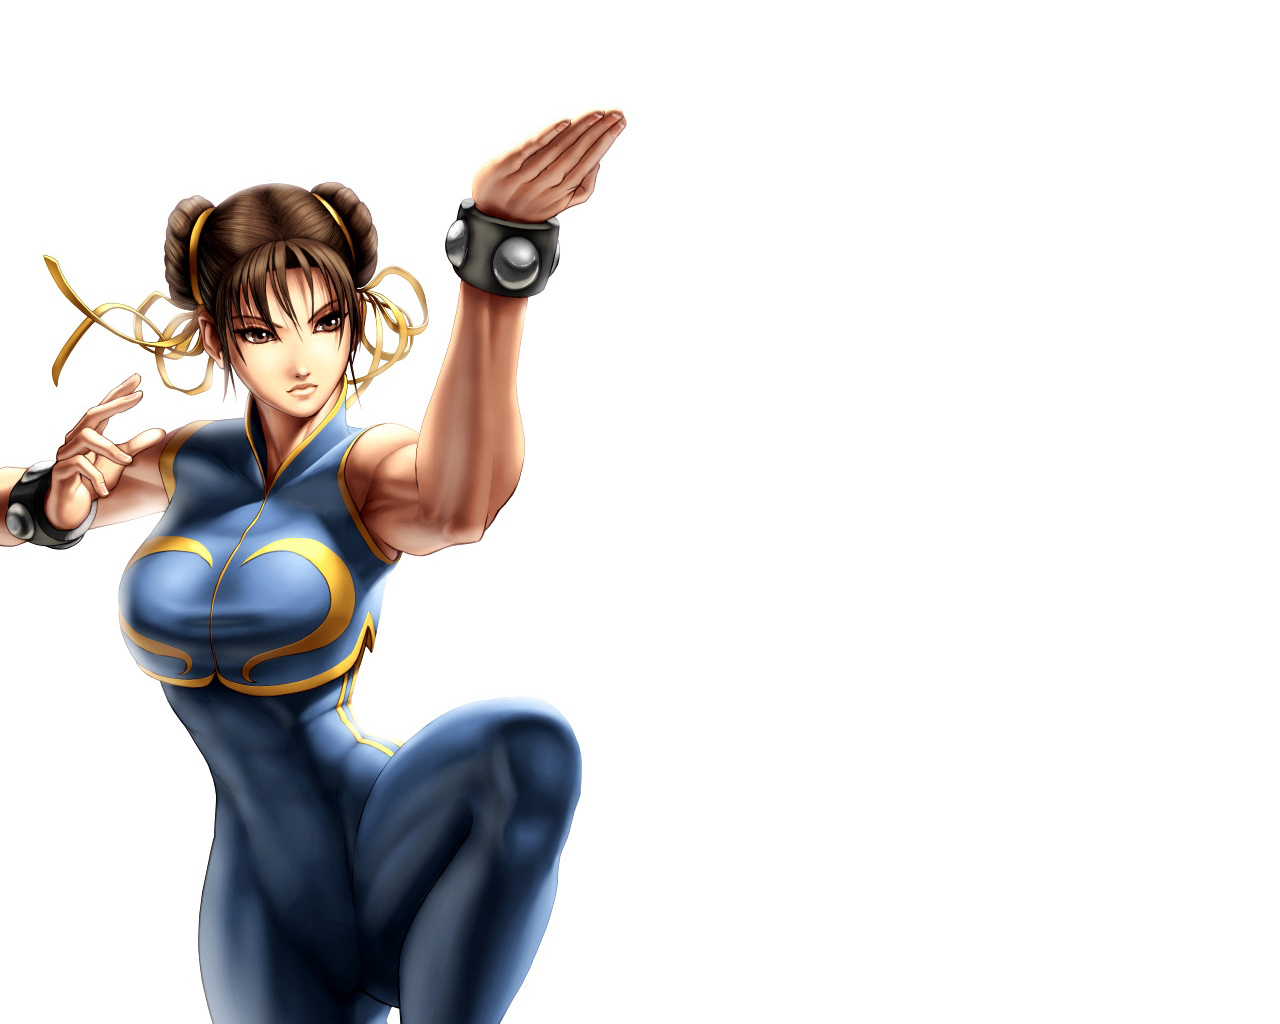 Chun Li (Street Fighter) wallpapers for desktop, download free Chun Li (Street  Fighter) pictures and backgrounds for PC 